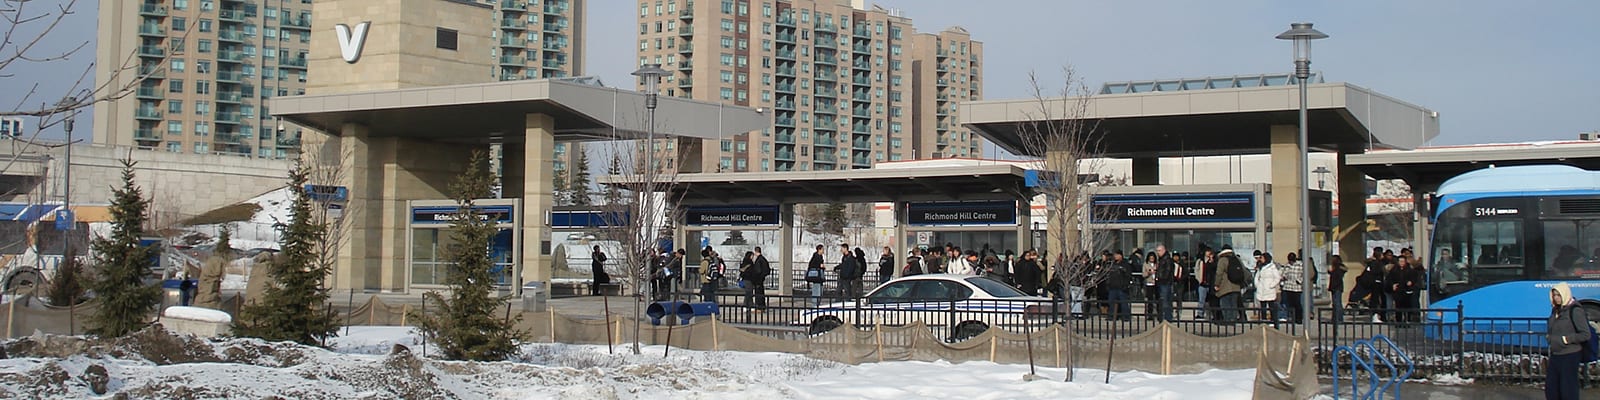 Photo of Richmond Hill Centre station with people waiting for buses.